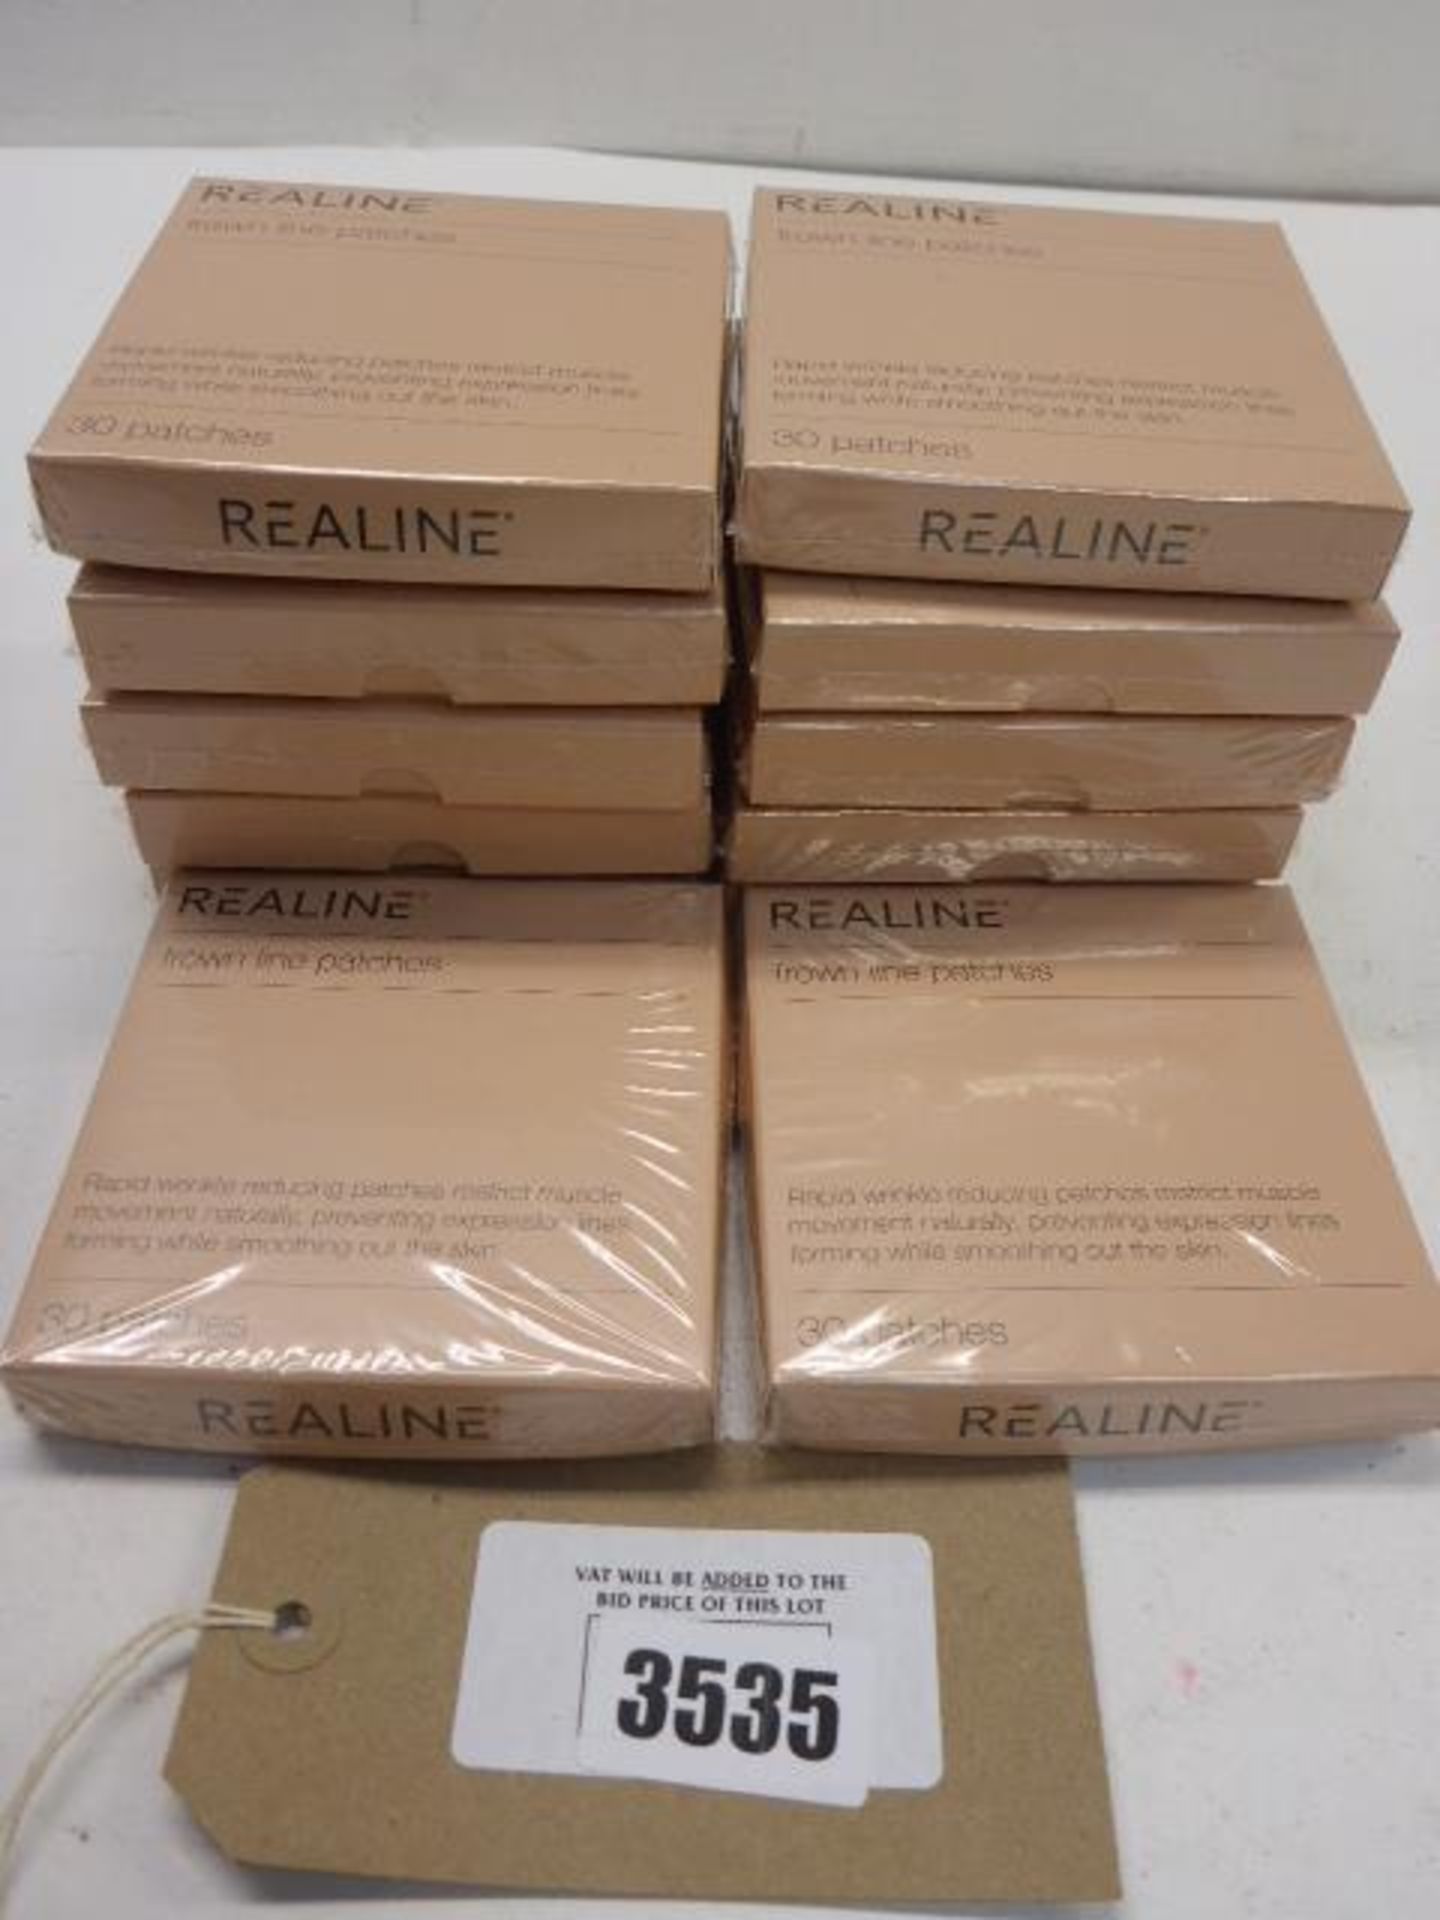 12 pack of 30 Realione Frown line patches